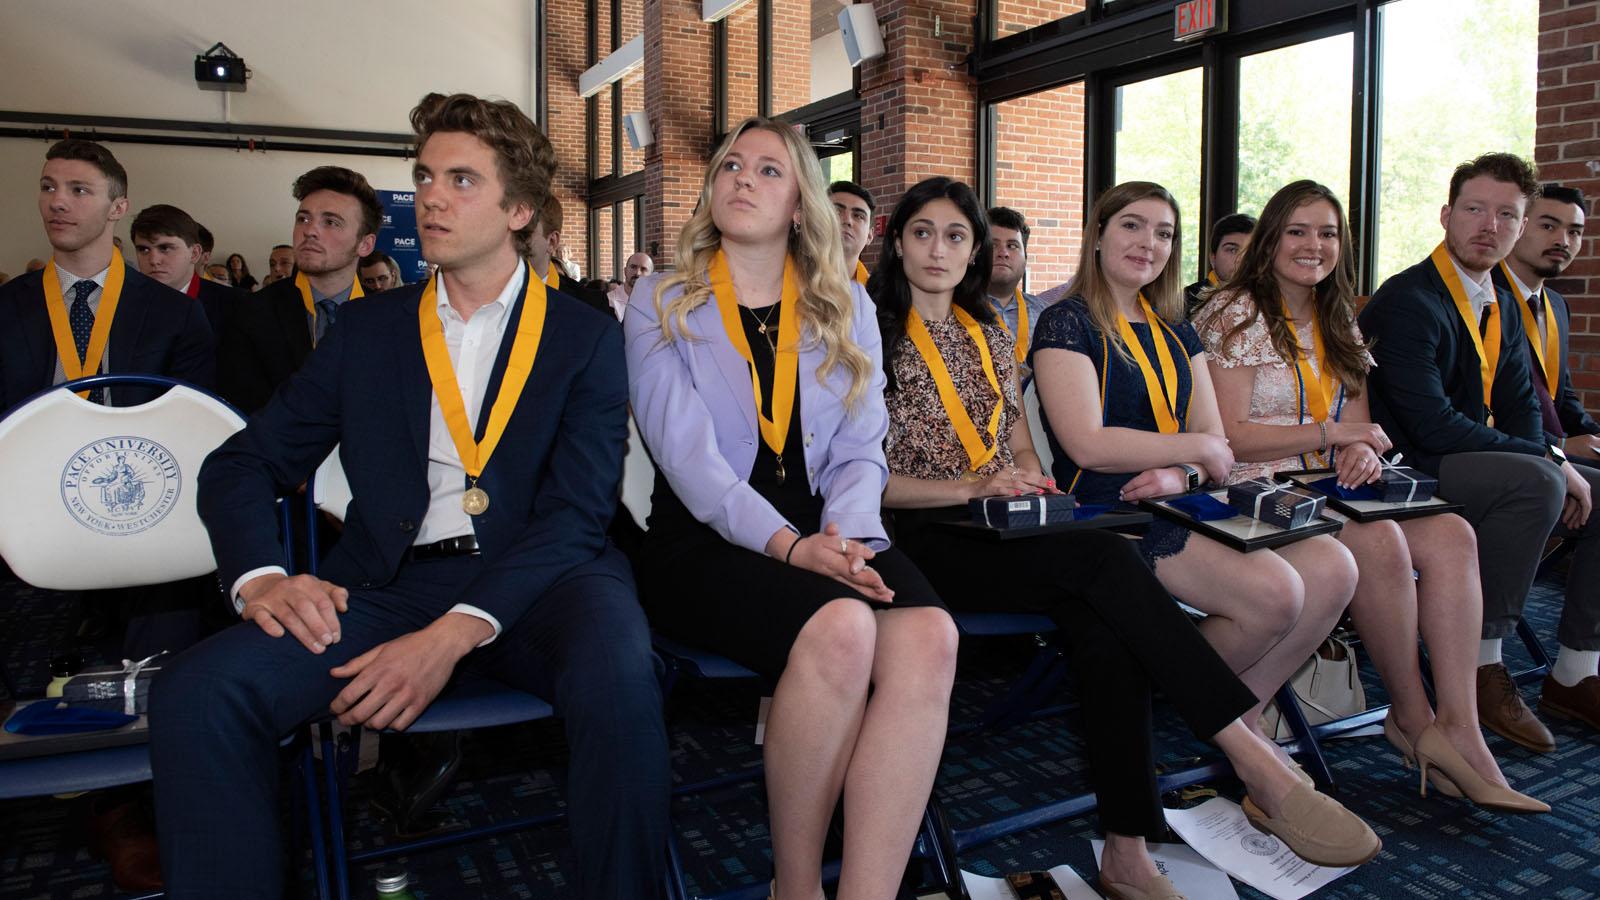 Award recipients wearing their medals while watching their classmates receive honors at the 2023 Lubin Pleasantville Awards Ceremony